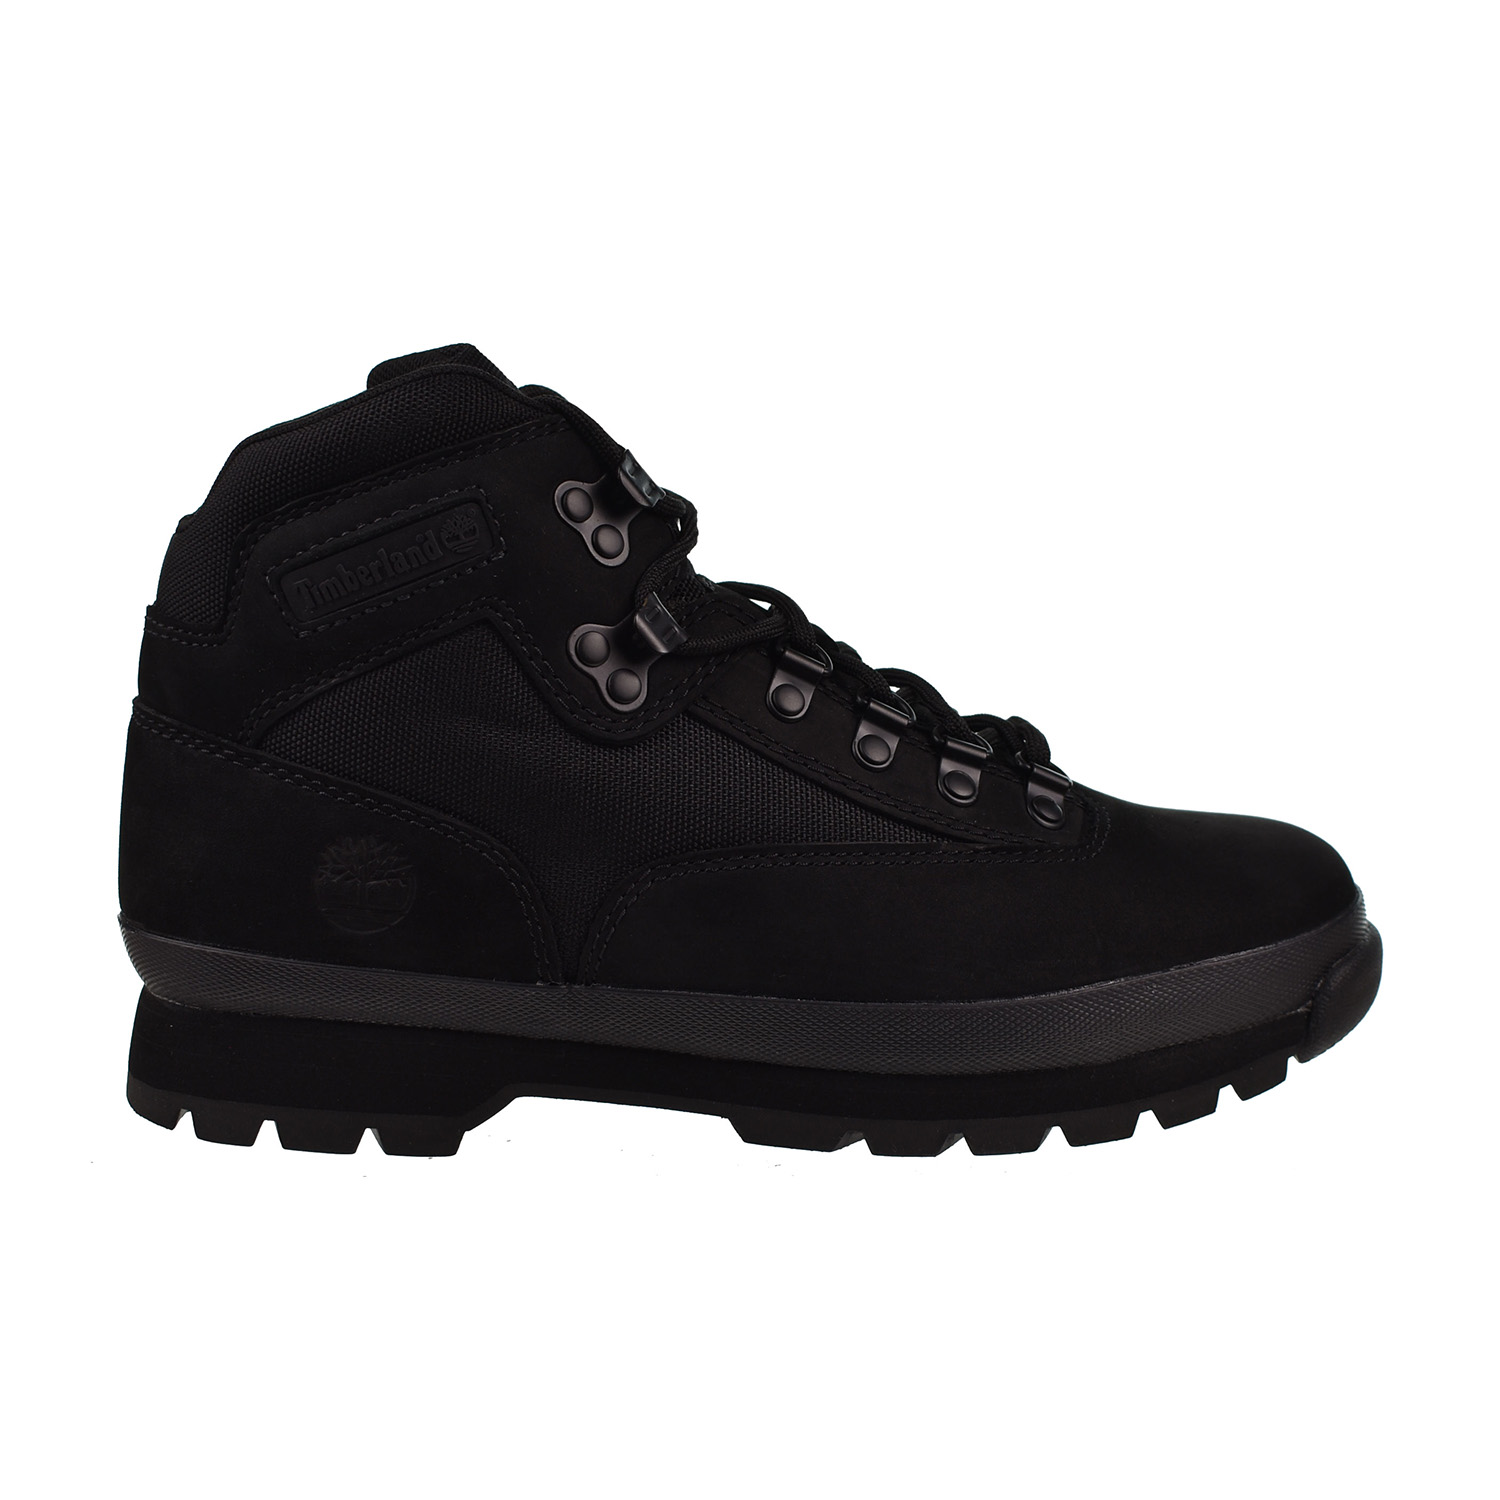 Tmiberland Timberland Euro Hiker Lace Up Men's Boots Black tb0a28a2